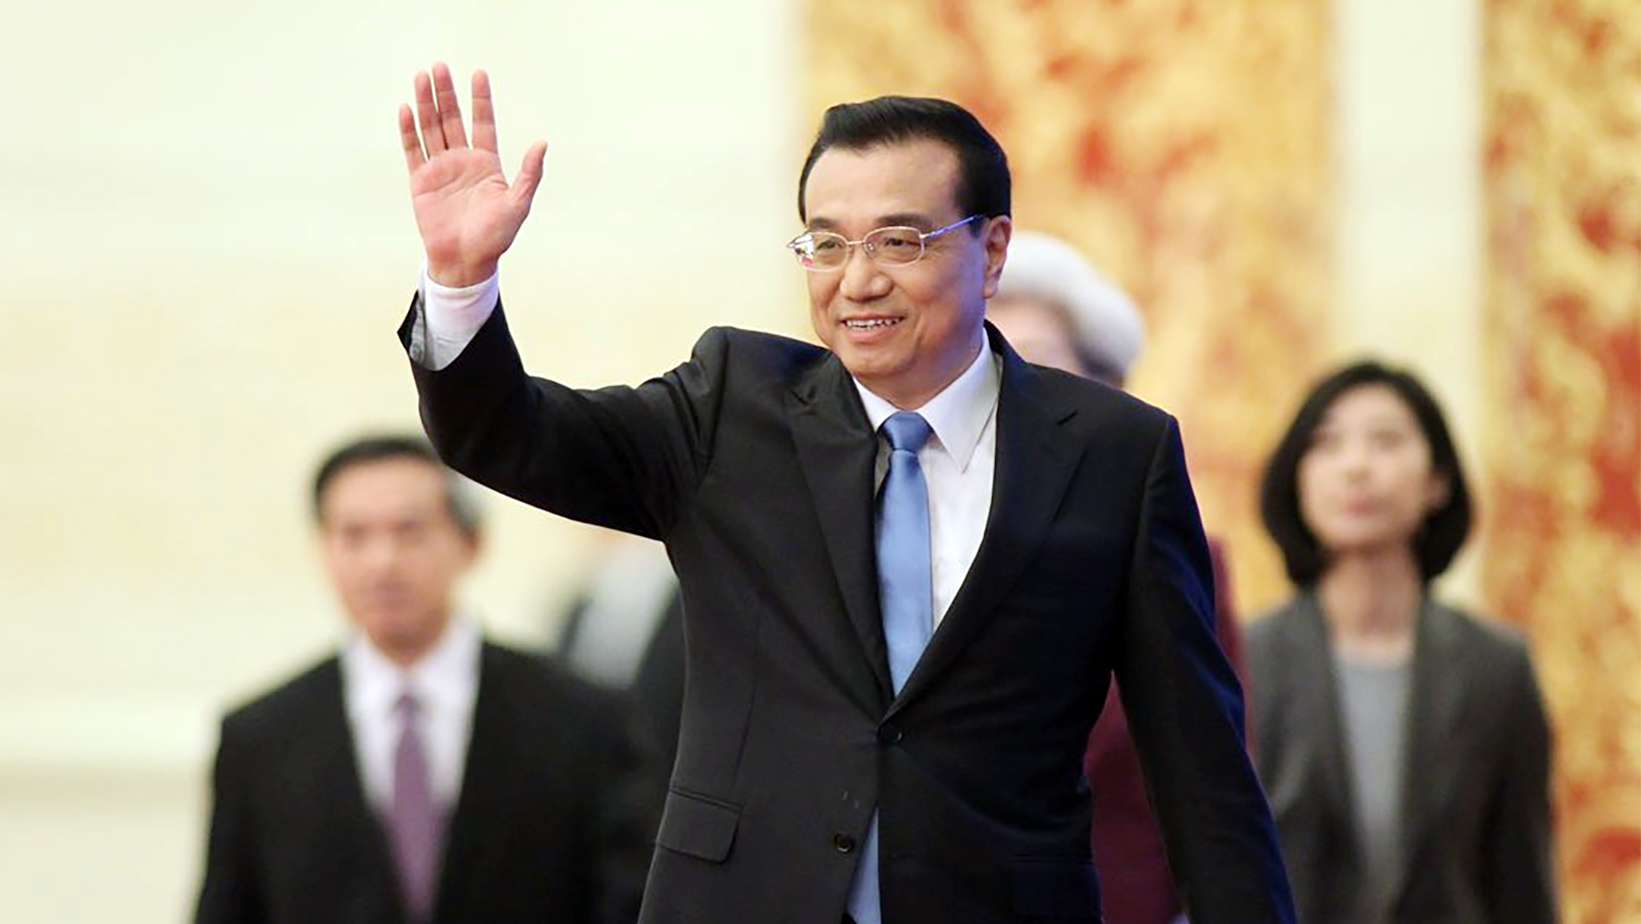 Chinese Premier Li Keqiang gives a press conference after the fifth session of the NPC closed at the Great Hall of the People in Beijing on March 15. Photo: Simon Song